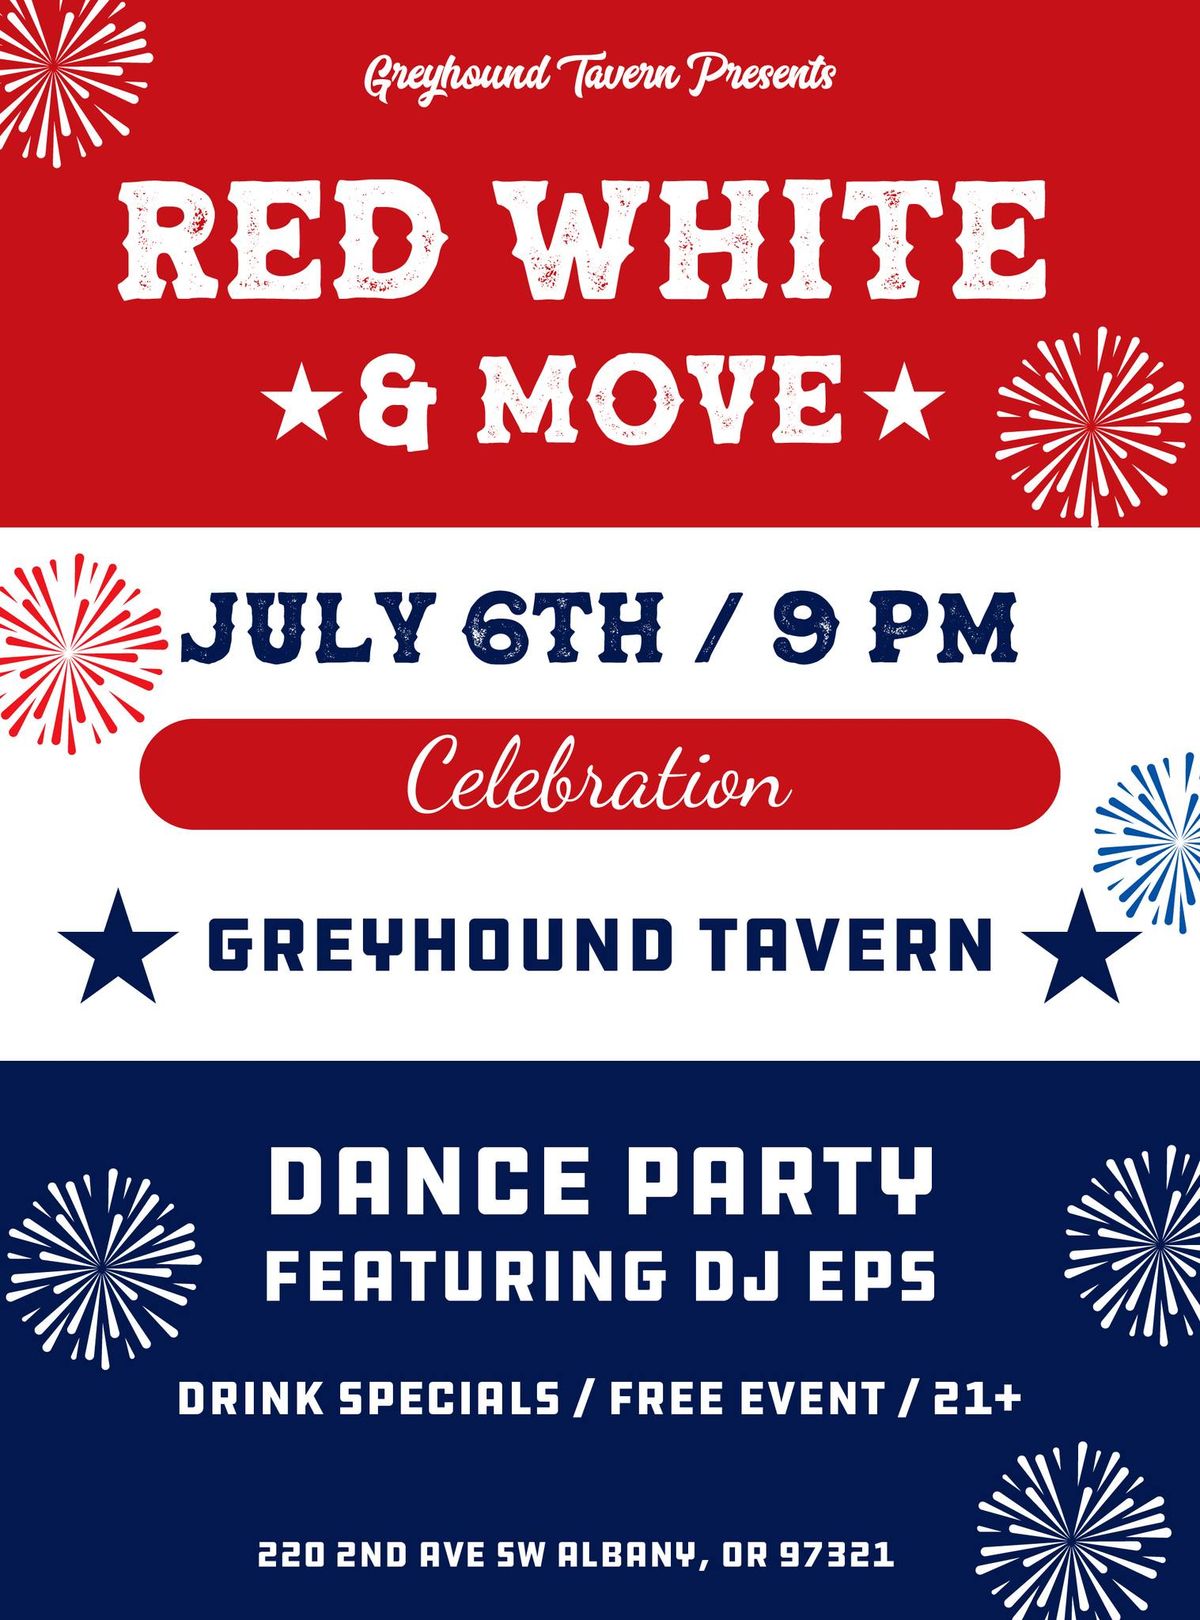 Red White & Move Dance Party